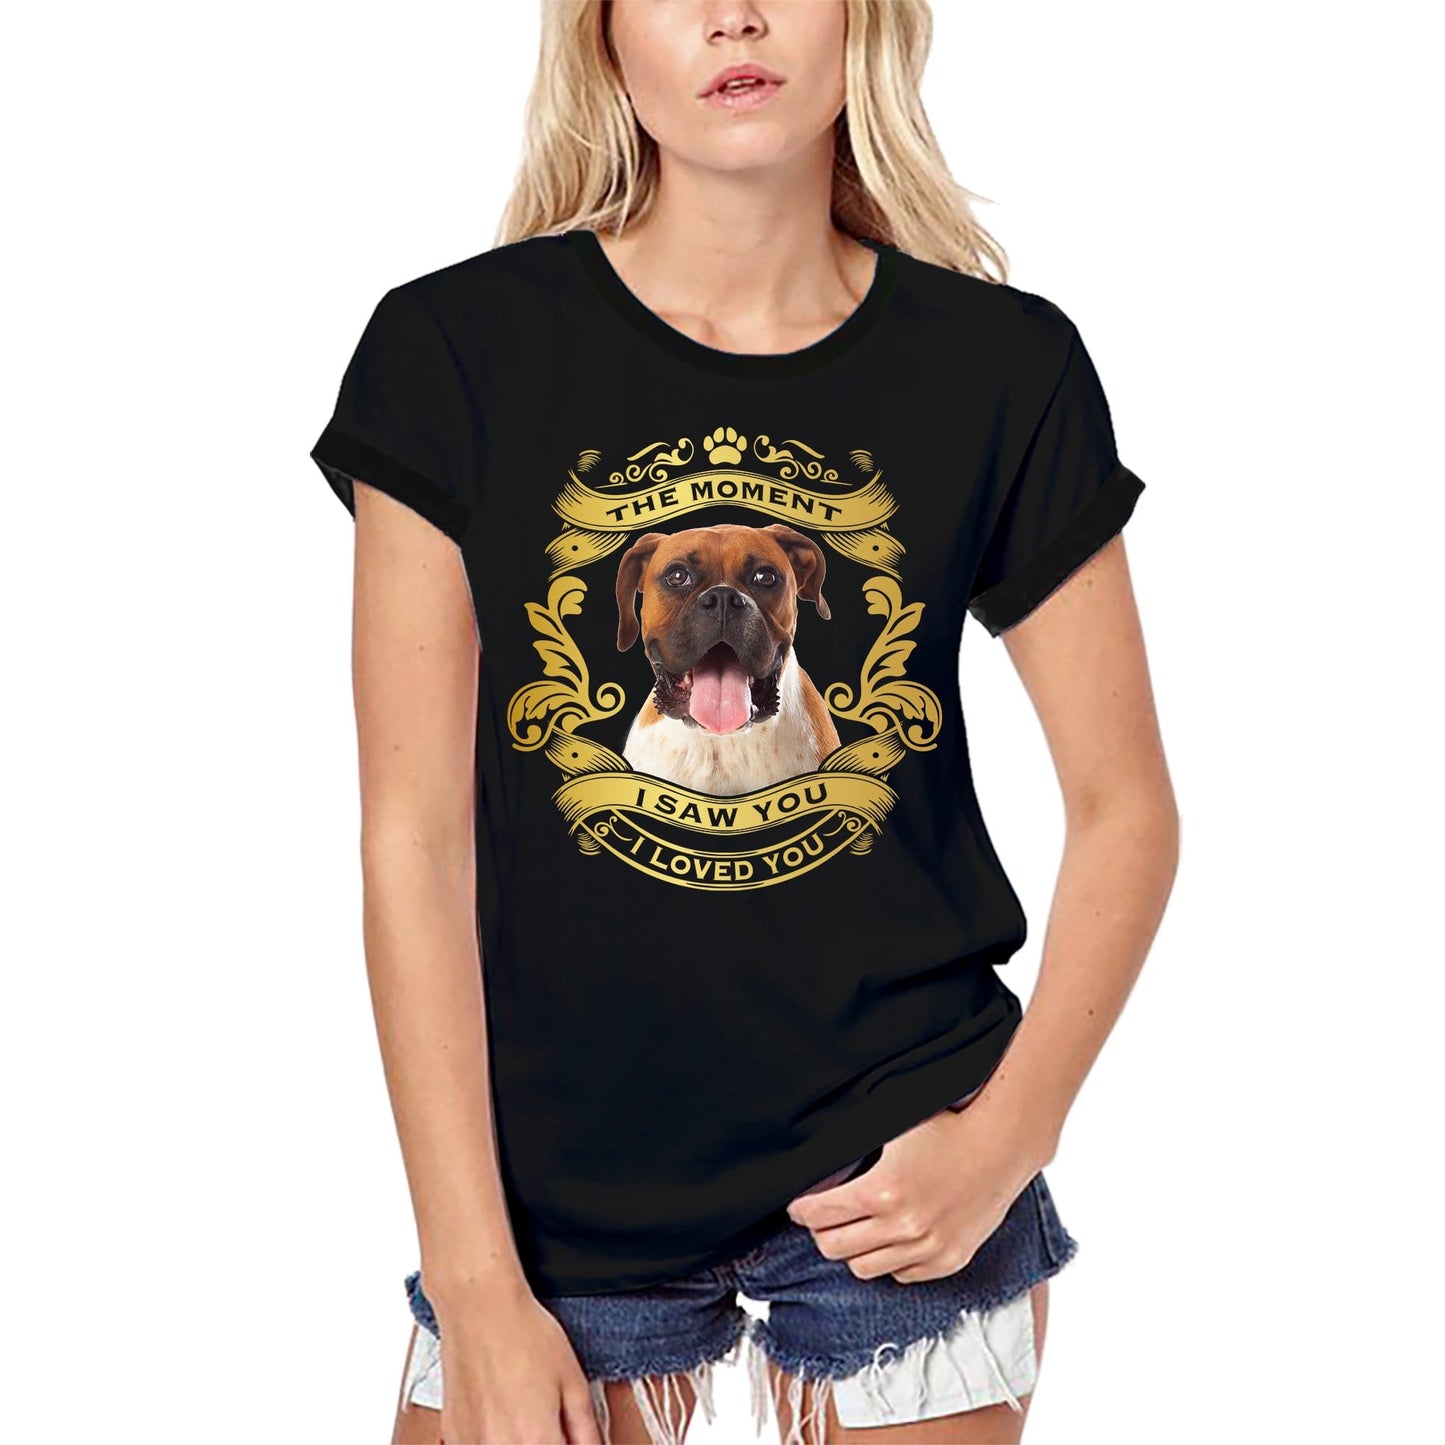 ULTRABASIC Women's Organic T-Shirt Boxer Dog - Moment I Saw You I Loved You Puppy Tee Shirt for Ladies